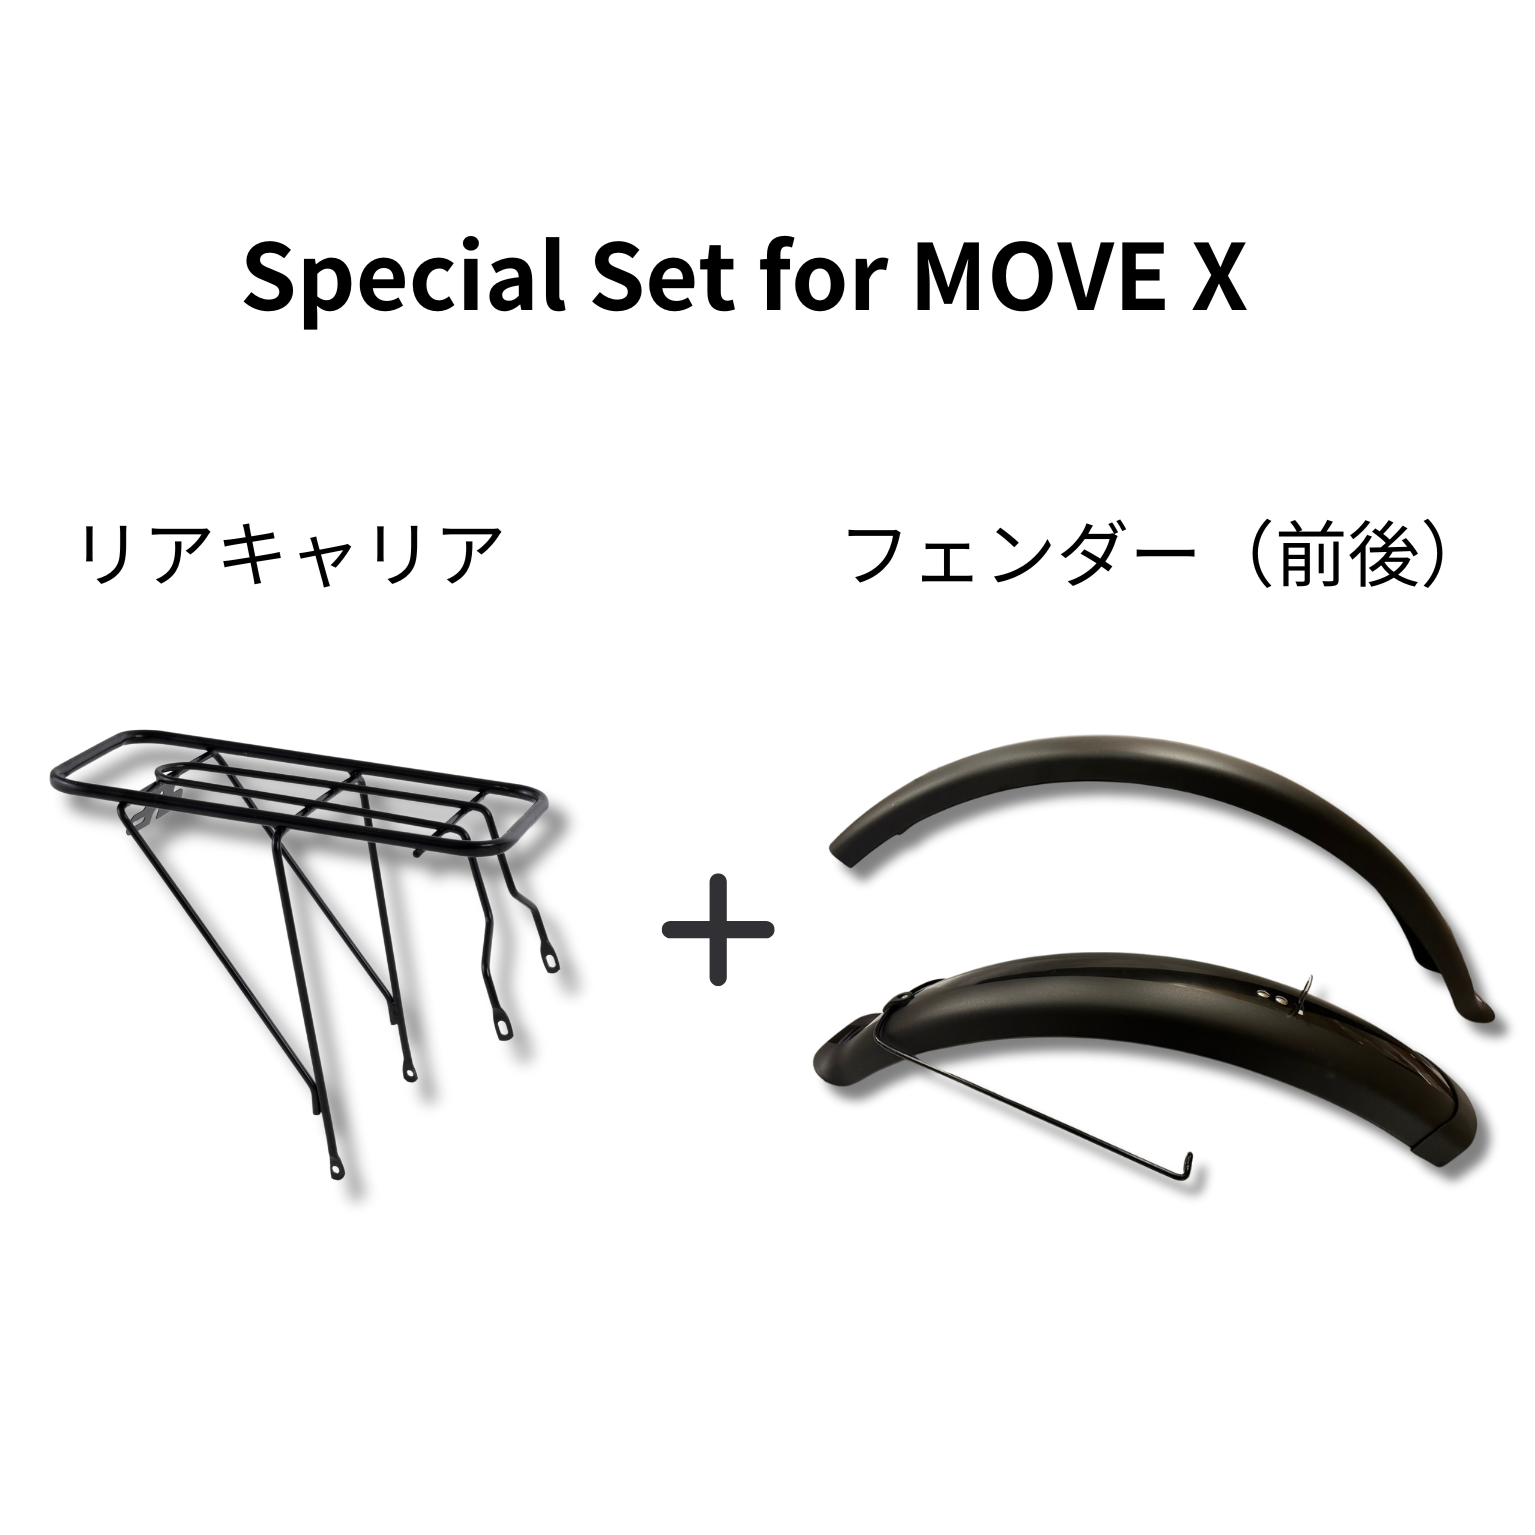 Special Set for MOVE X